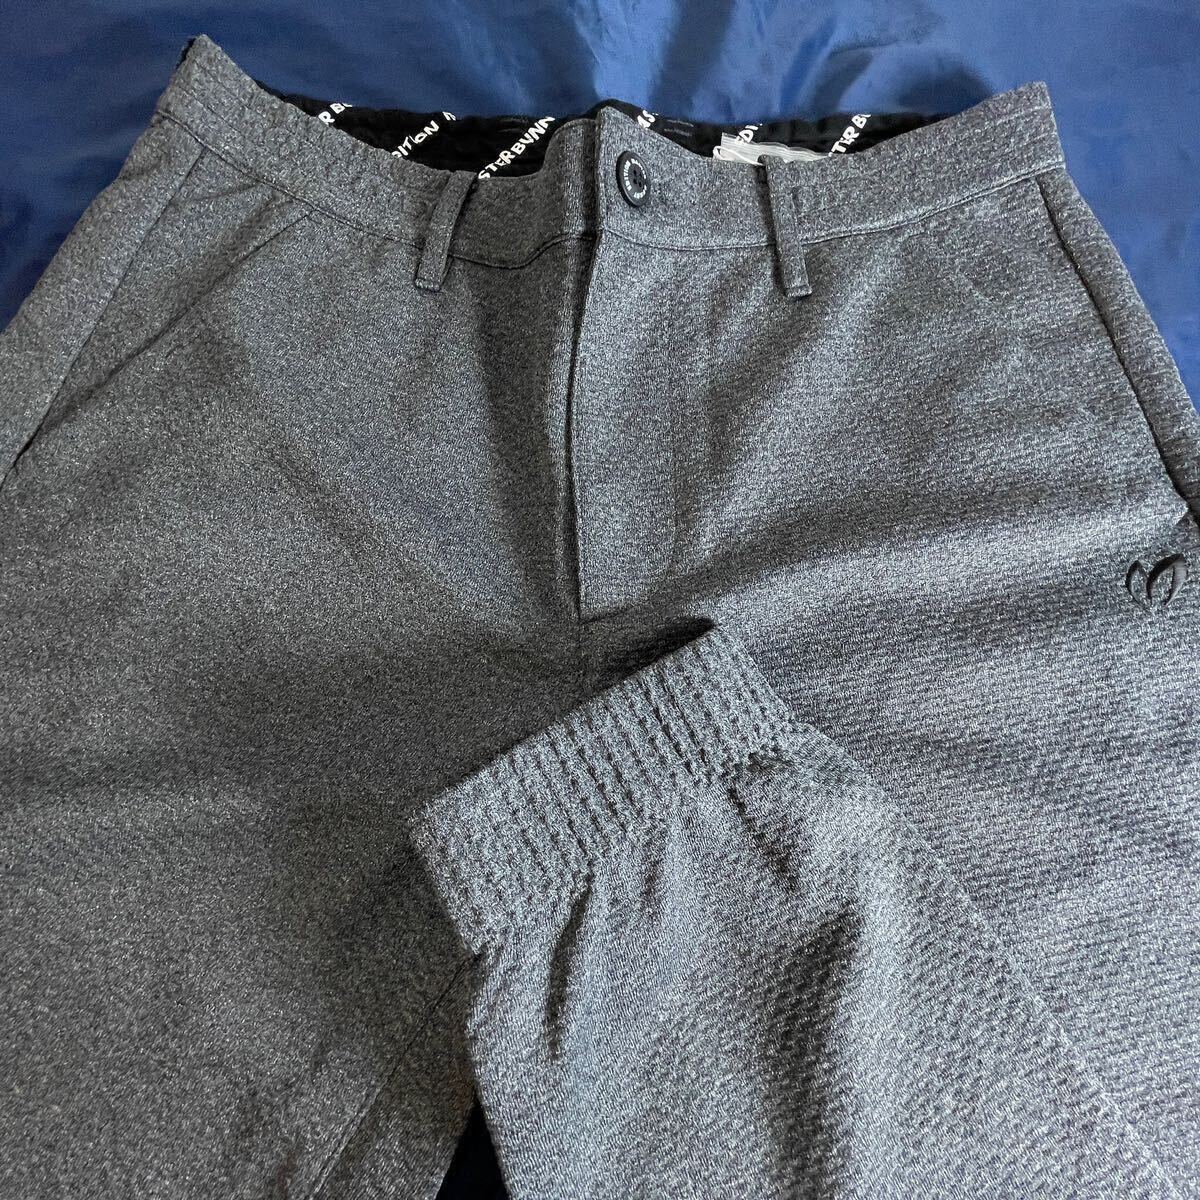  genuine article new goods 41031175 PEARLY GATES Pearly Gates master ba knee 5( size L) super popular stretch Jaguar do Easy pants comfortably rubber go in 